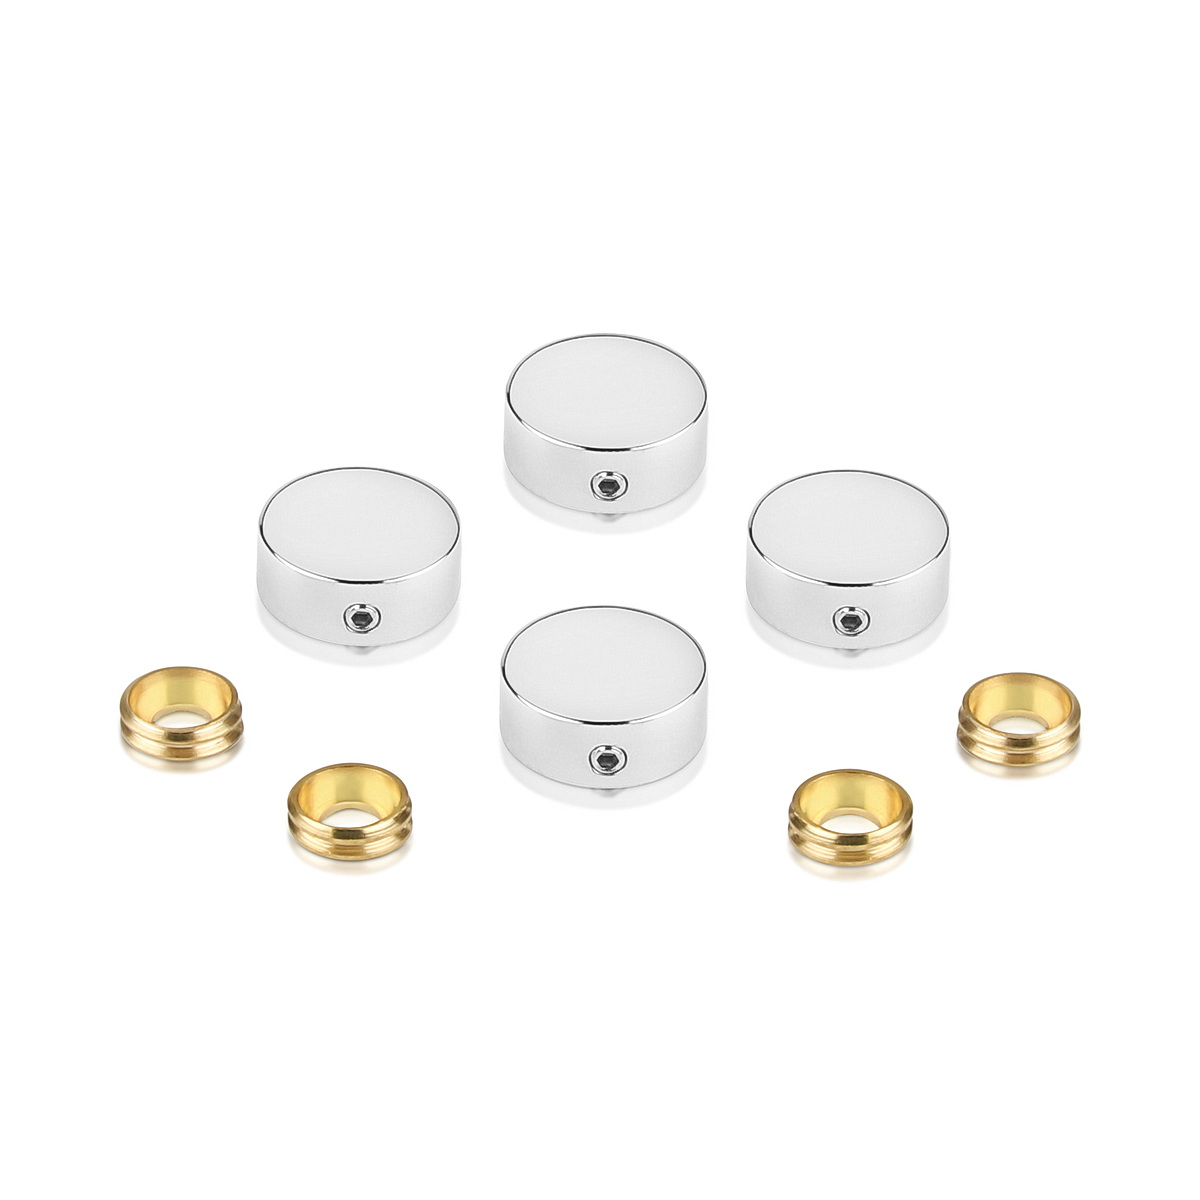 Set of 4 Locking Screw Cover Diameter 5/8'', Polished Stainless Steel Finish (Indoor Use Only)